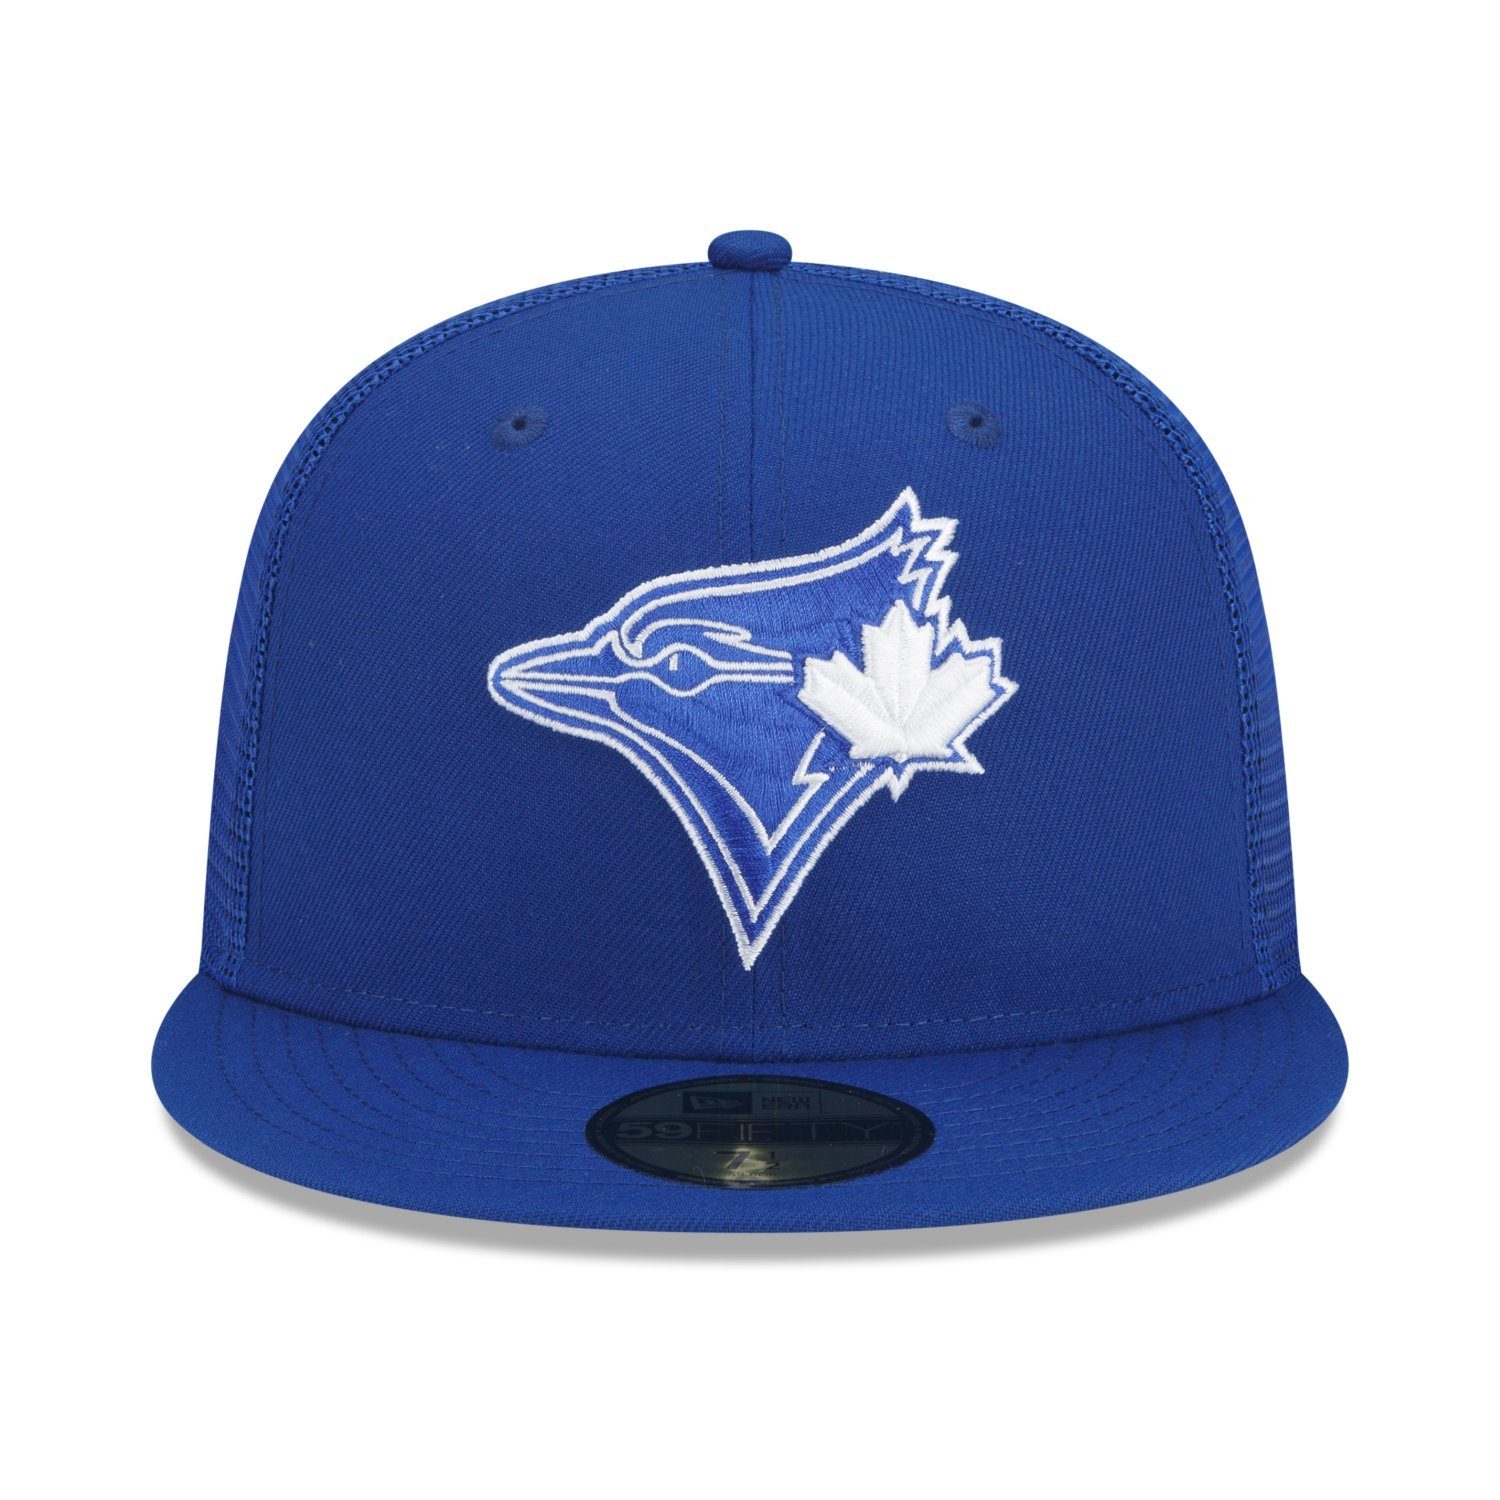 59Fifty Era New Fitted Jays Toronto PRACTICE Cap BATTING